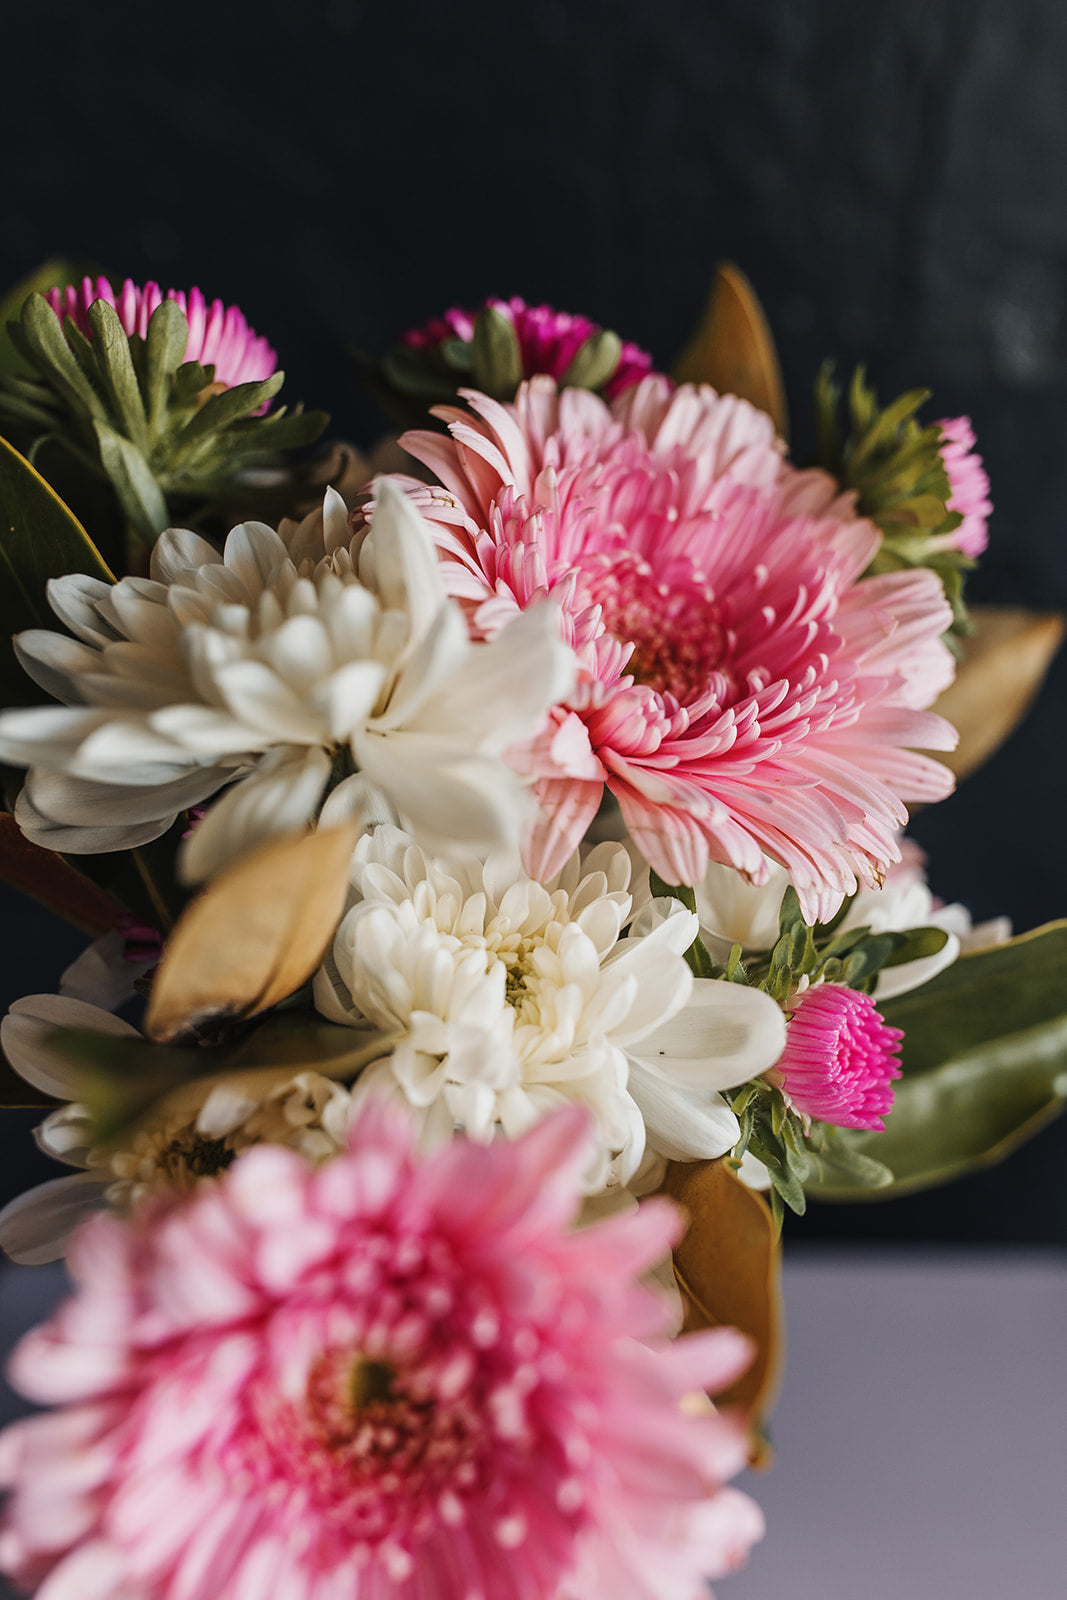 A close up on seasonal flowers, chrysanthemums, gerberas and asters with magnolia foliage